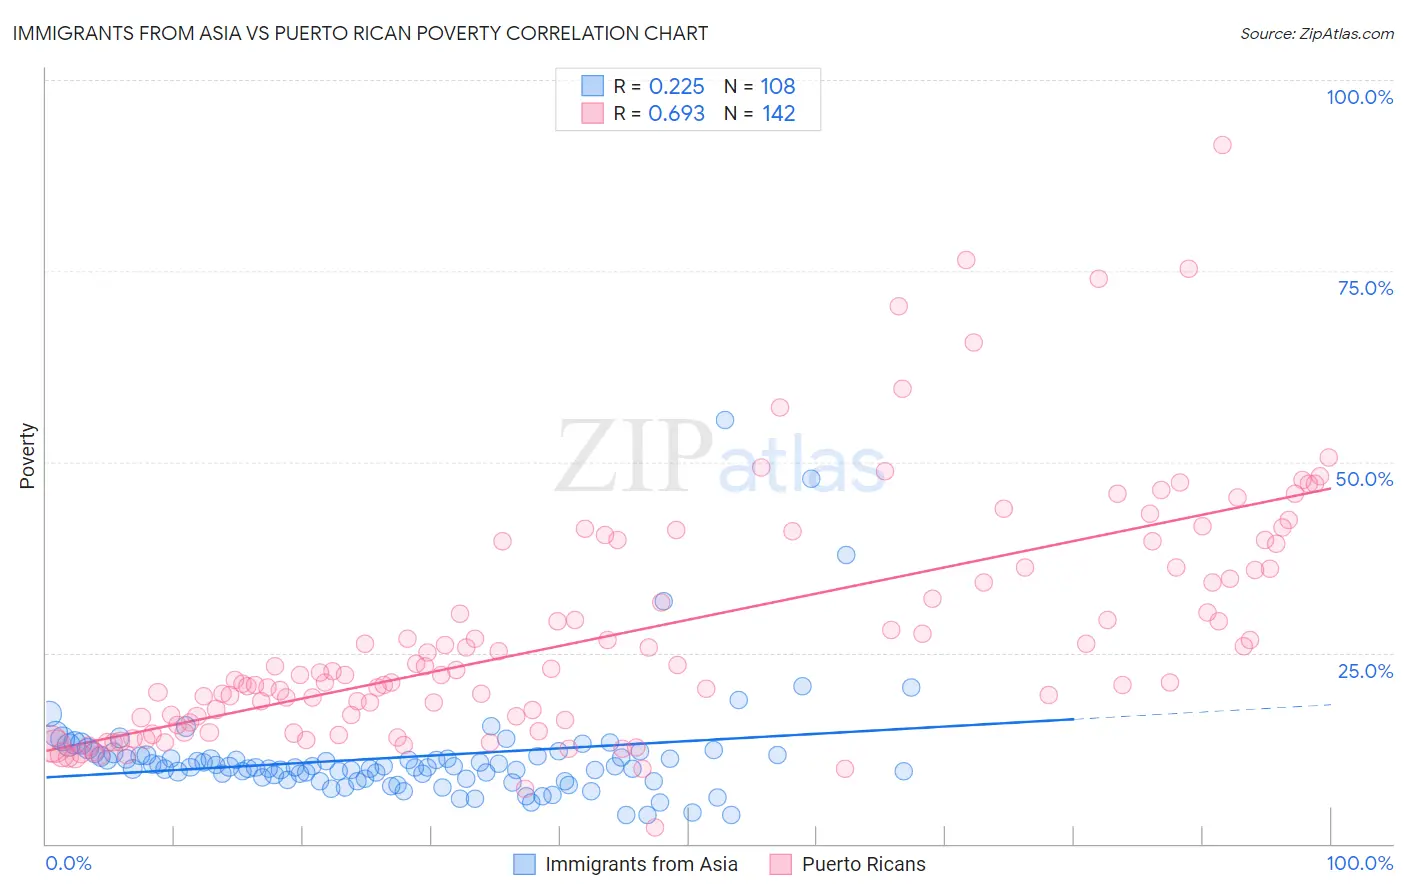 Immigrants from Asia vs Puerto Rican Poverty